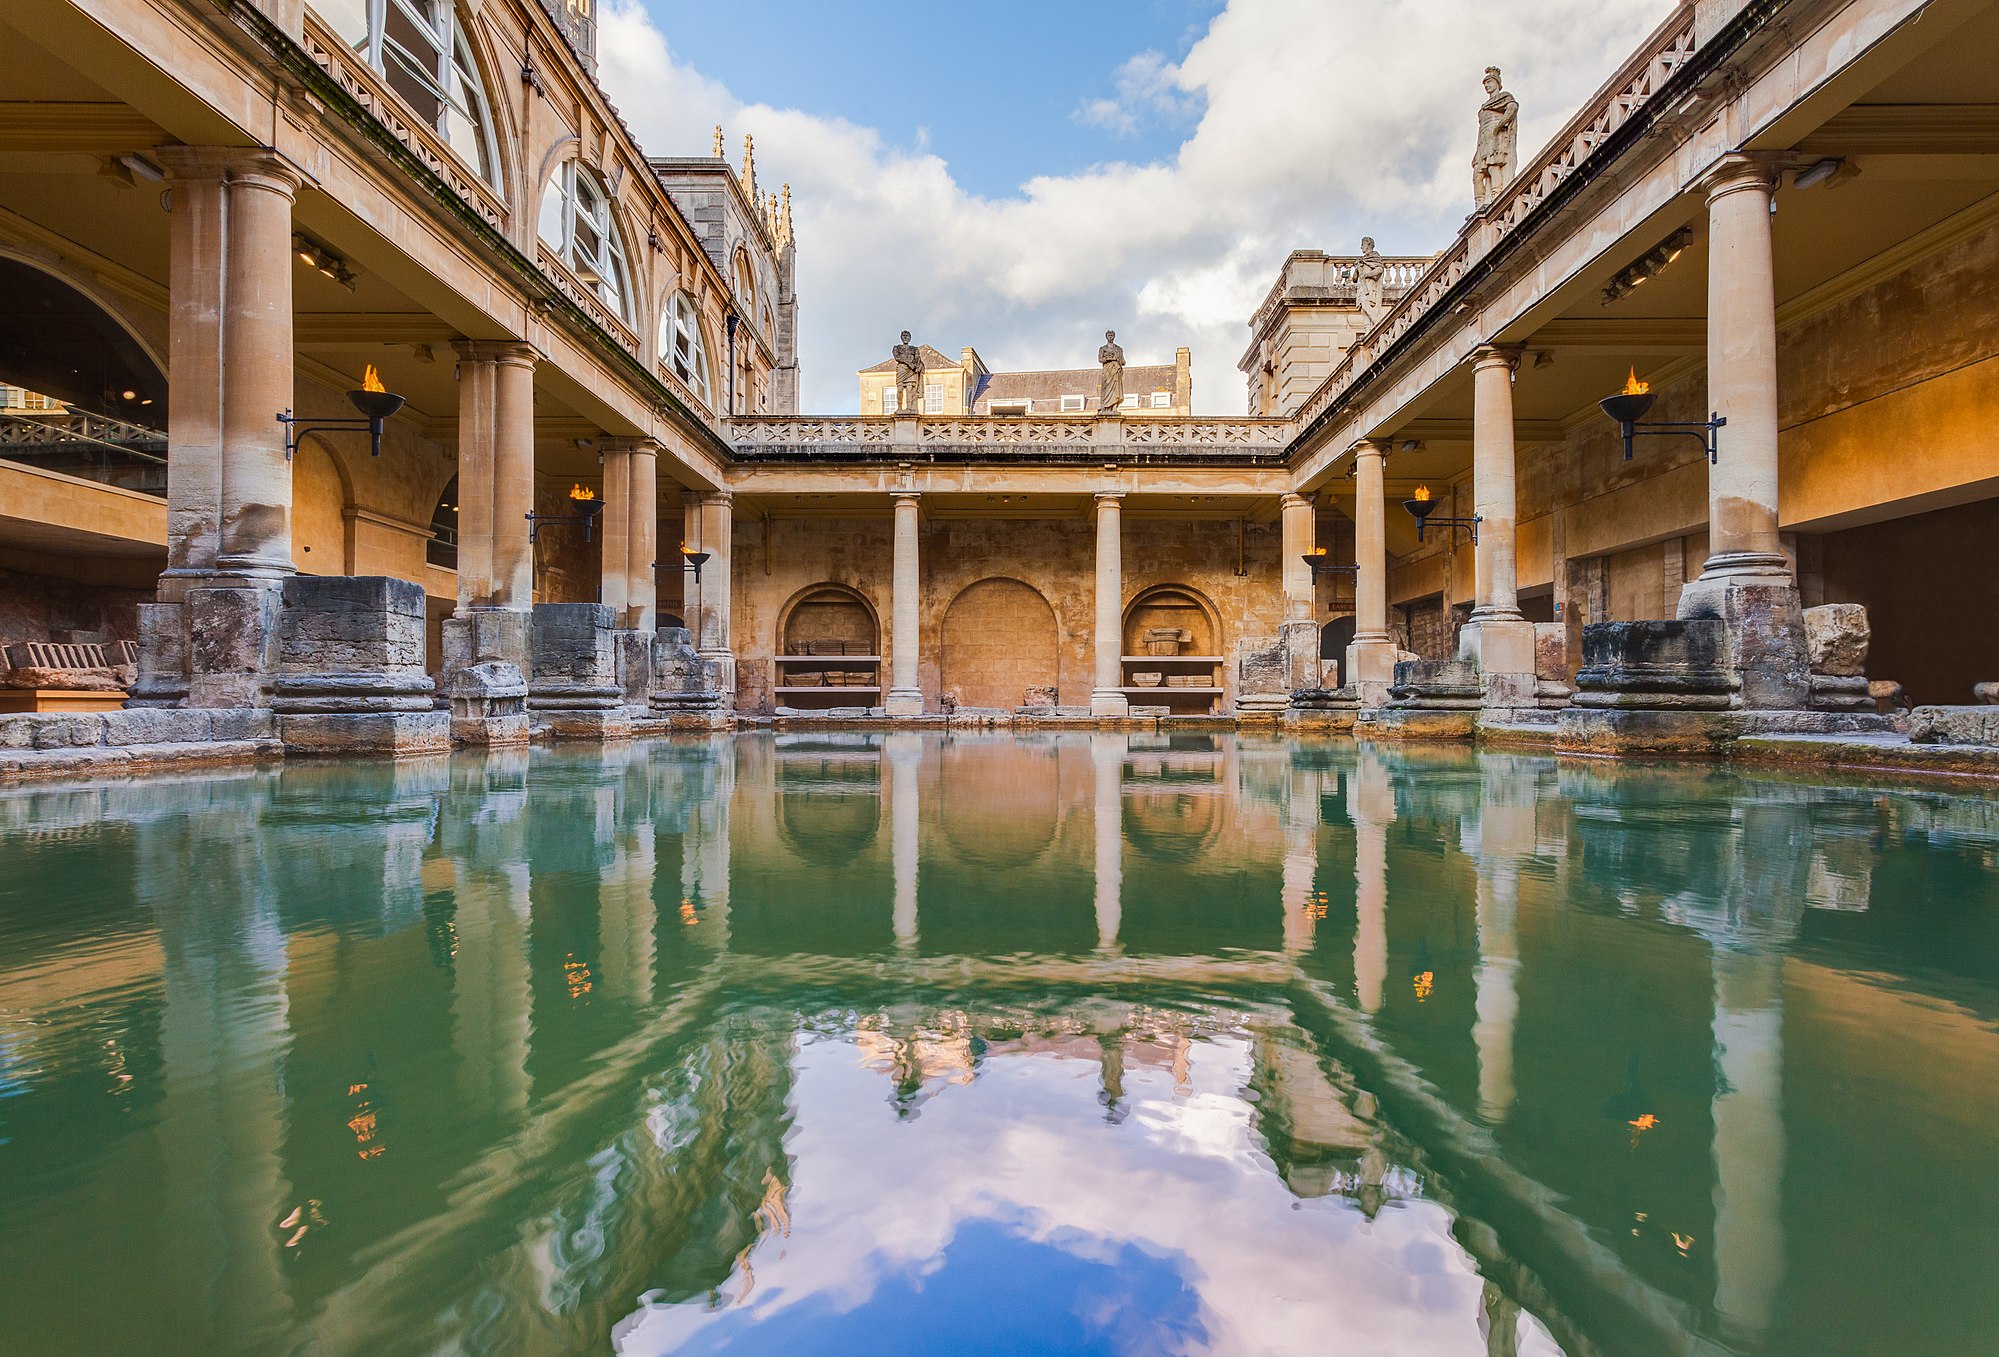 View of the Great Bath, part of the Roman Baths complex, a site of historical interest in the city of Bath, England. The baths, based on the local hot springs, were built during the Roman occupation of Britain and has become a major touristic site.